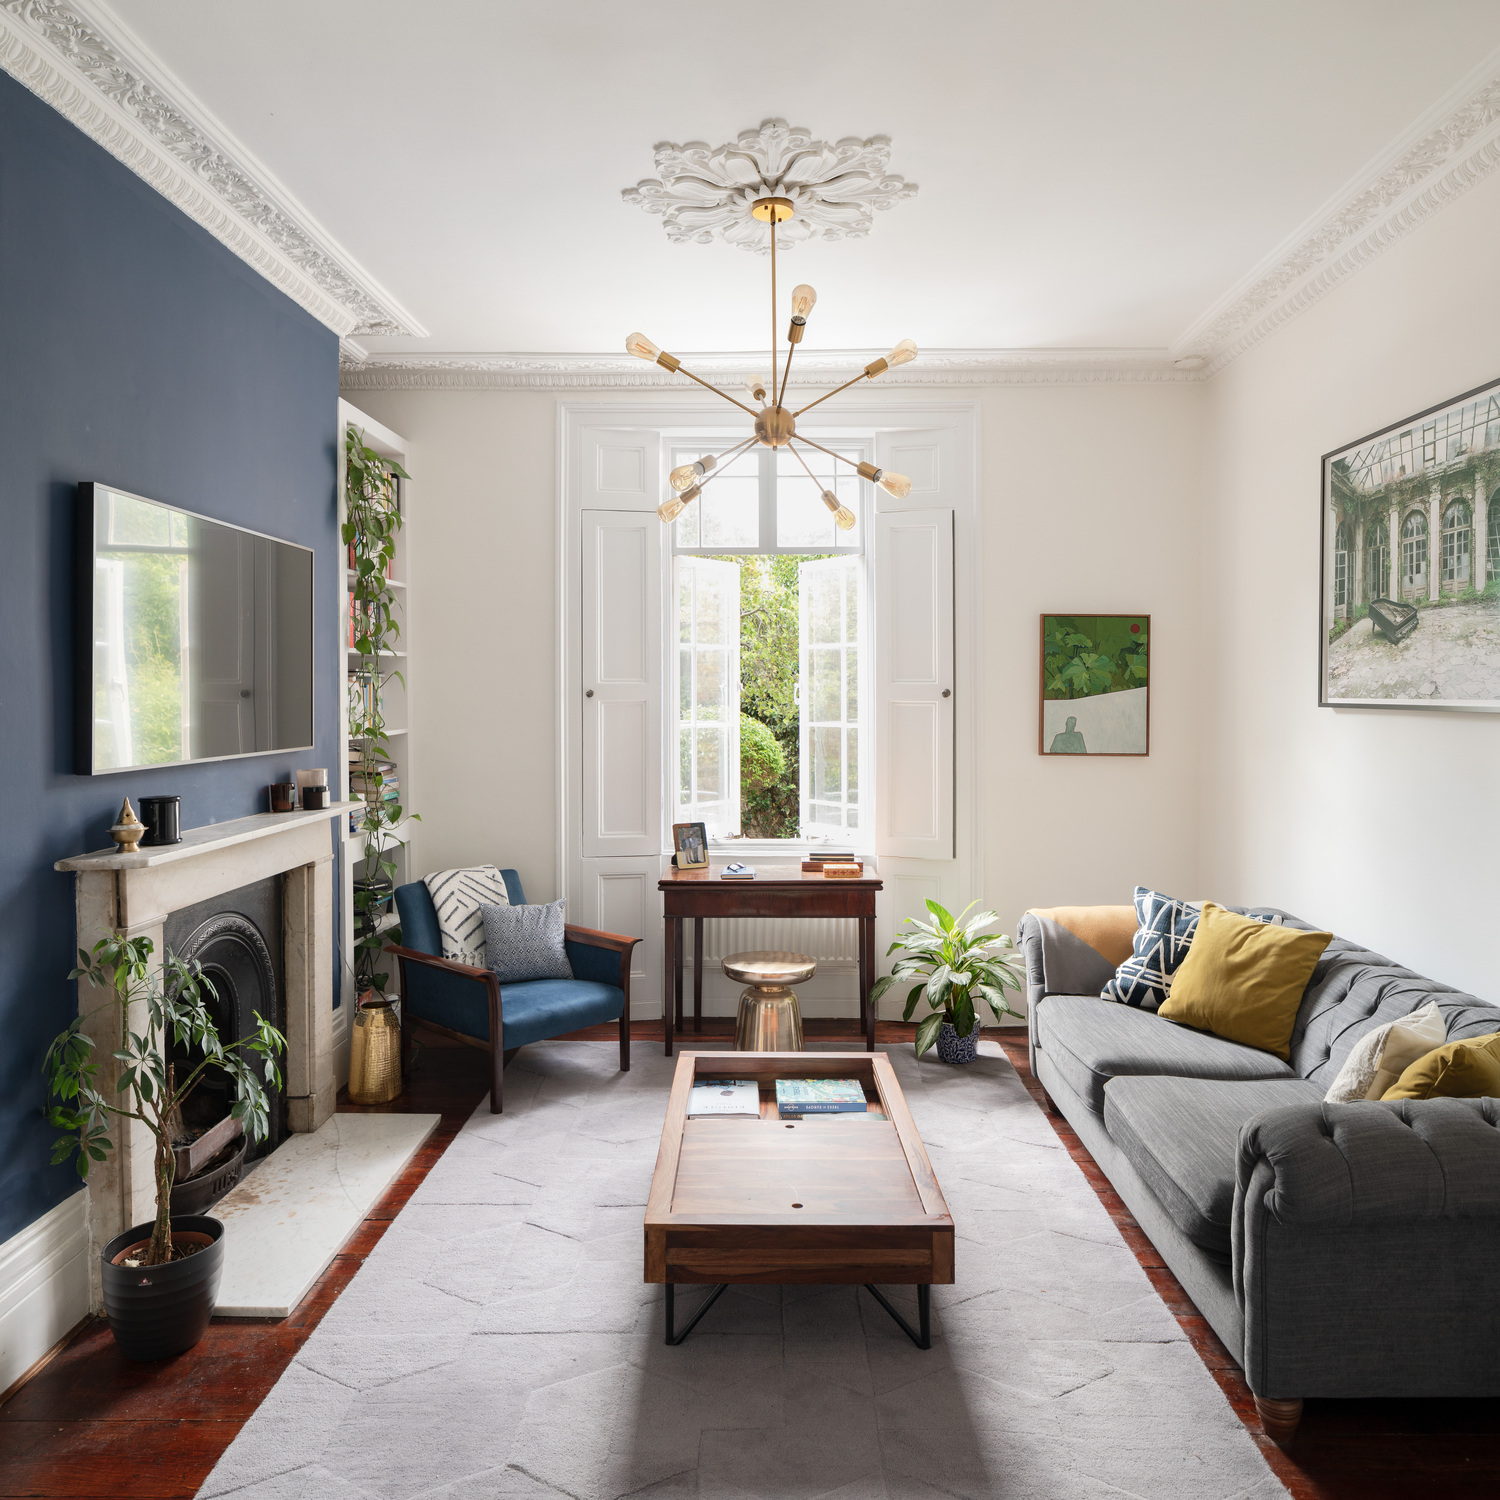 Calm living room aesthetic done right at this Resi renovation in Lambeth